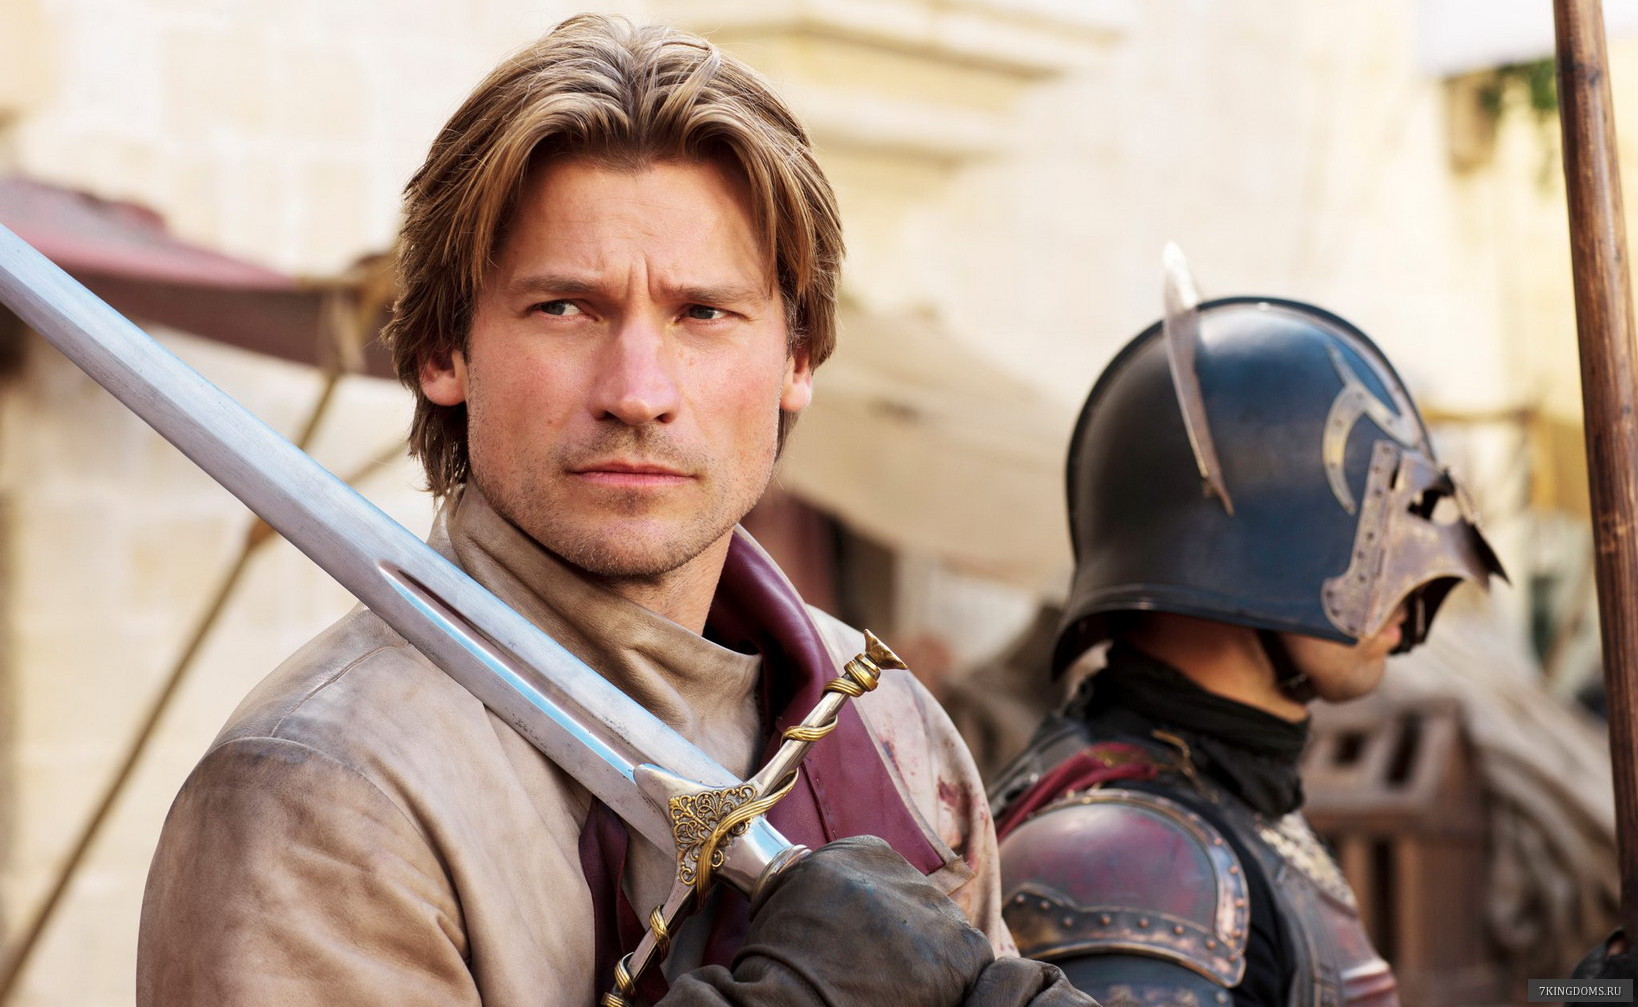 Game Of Thrones Jaime Lannister And Cersei Lannister Controversy!